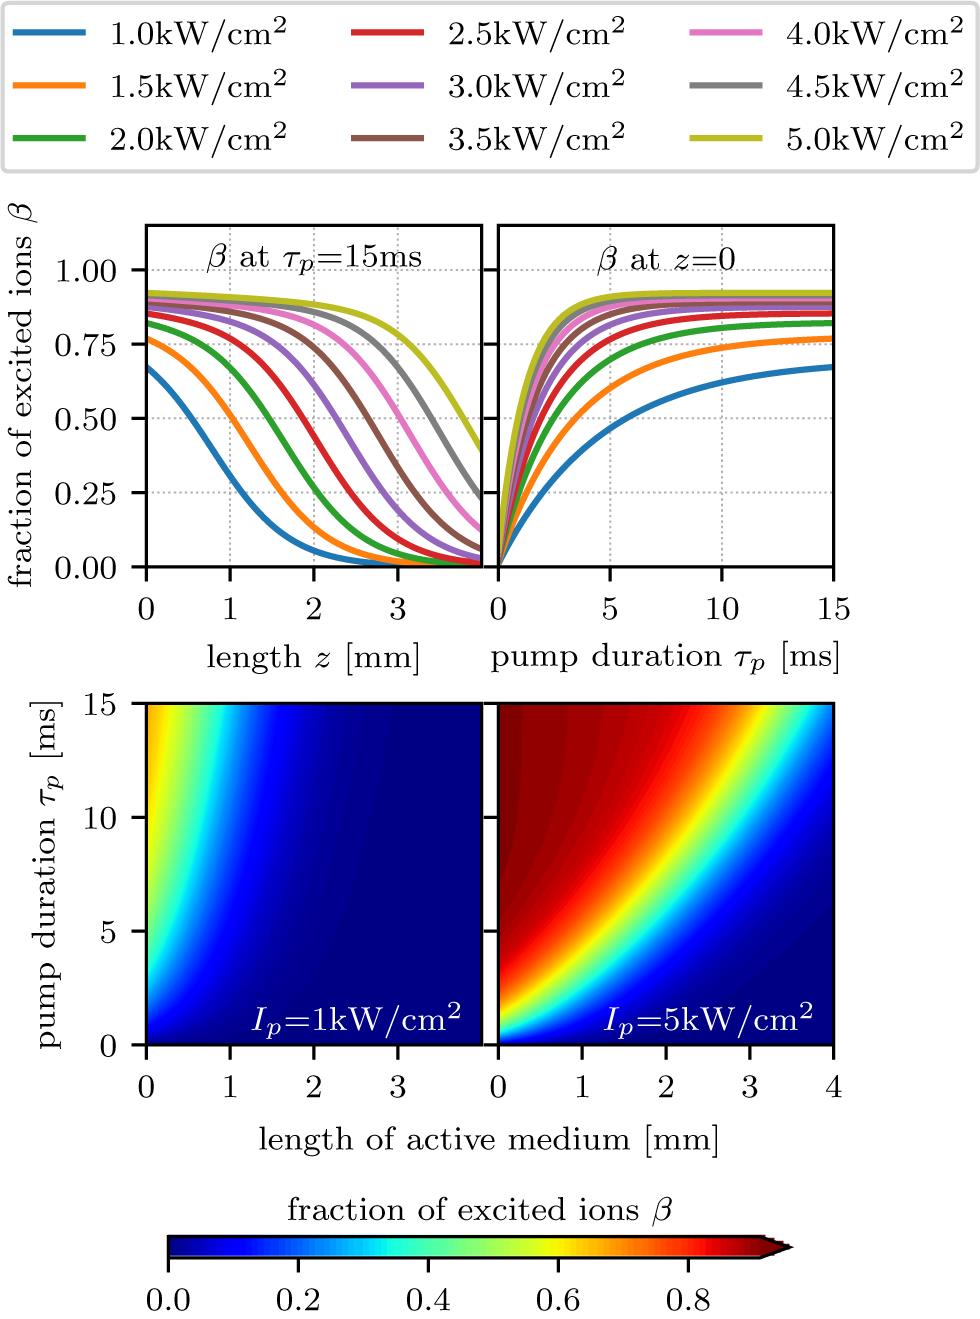 Results from the numerical simulation of the pump process in an 8% (atomic fraction) doped Tm:YAG crystal with a pump duration of 15 ms assuming a fluorescence lifetime of 15 ms. Upper left graph: relative inversion density as a function of the penetration depth in the laser crystal for different pump intensities at the end of the pump pulse. Upper right graph: relative inversion density on the crystal’s entrance surface as a function of the pump duration for various pump intensities. Lower graphs: relative inversion density as a function of the penetration depth (horizontal) and pump duration (vertical) for a pump intensity of 1 kW/cm2 (left) and 5 kW/cm2 (right).